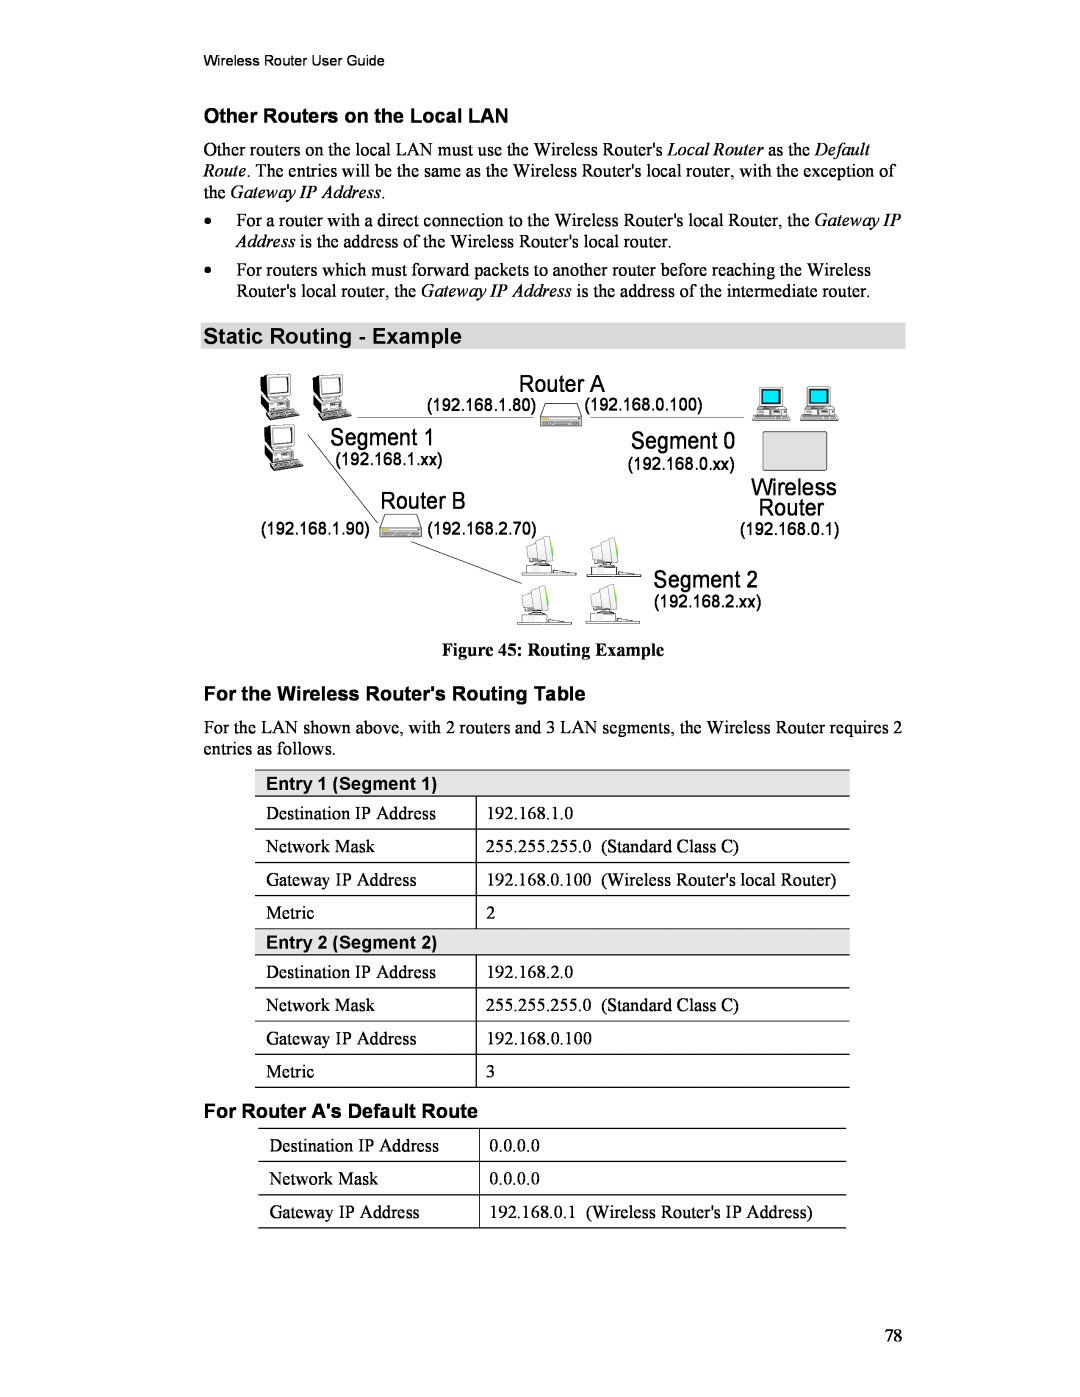 Hawking Technology HWR54G manual Static Routing - Example, Router A, Segment, Router B, Wireless Router, Routing Example 